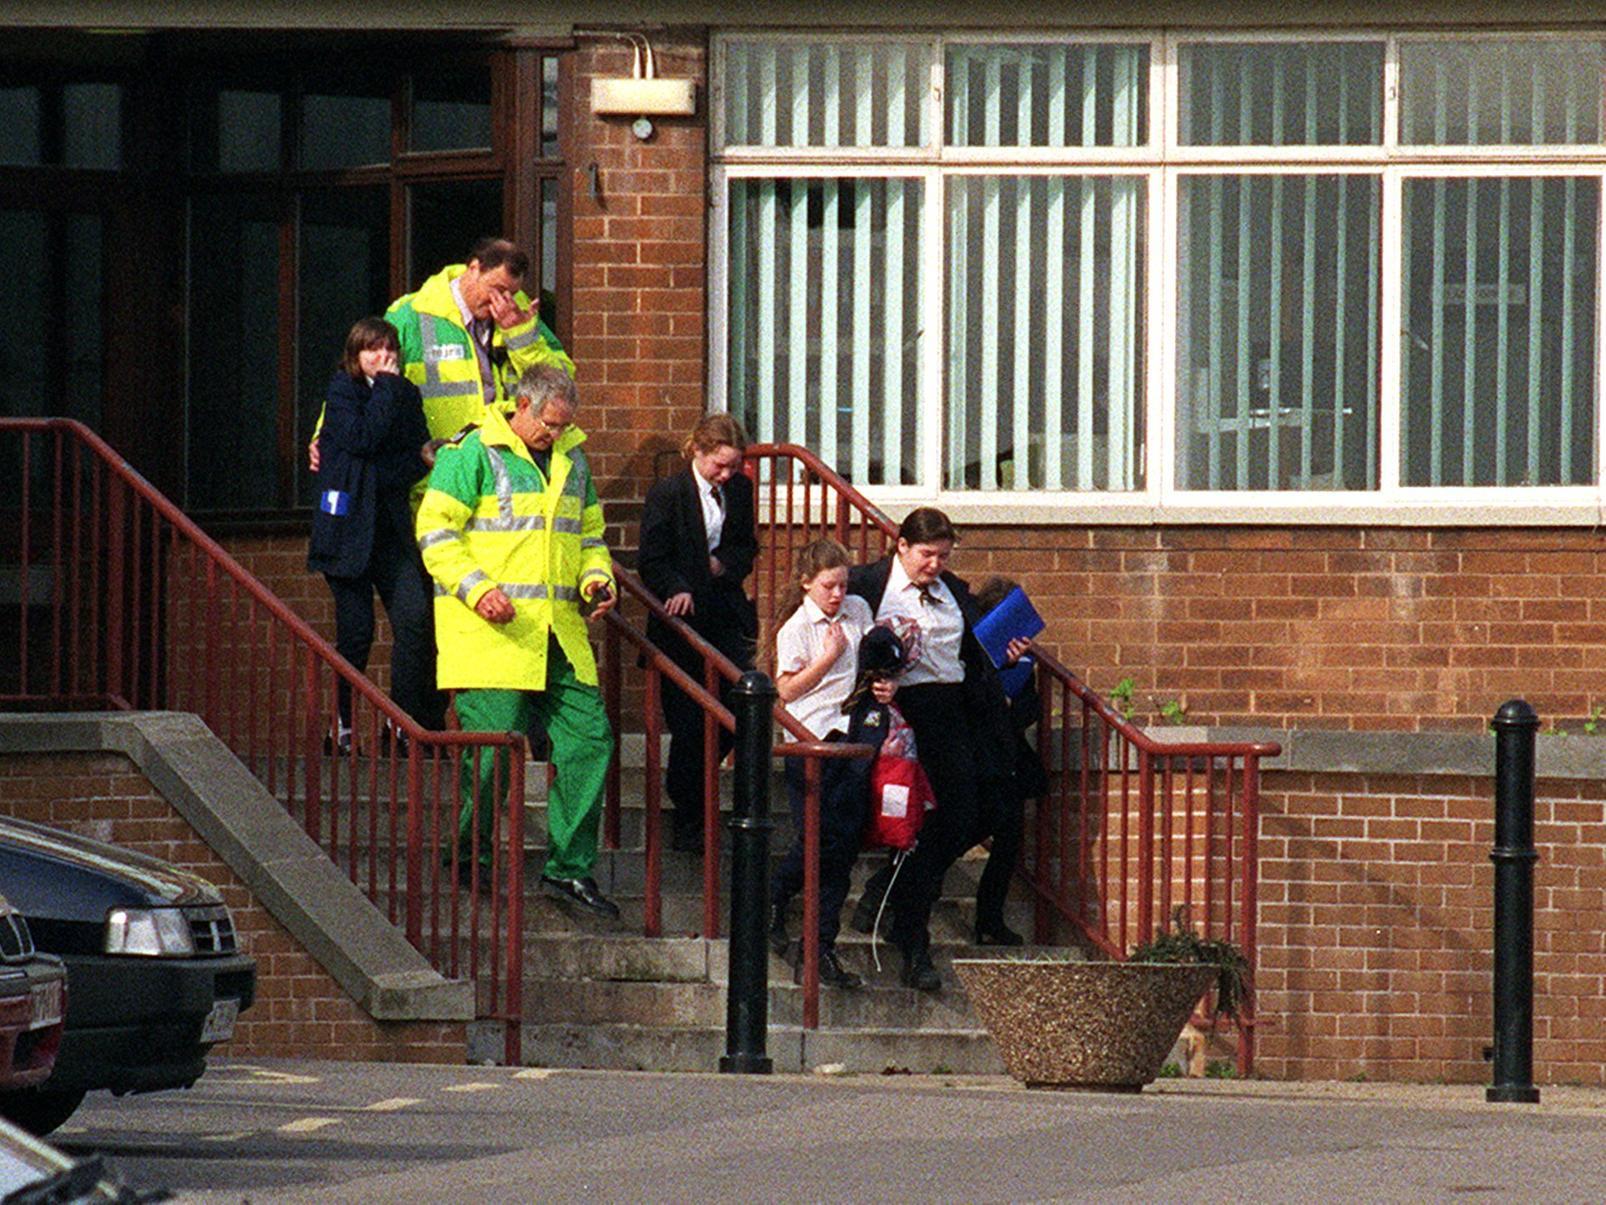 Pupils from West Leeds High School are led away by ambulance men after the roof of their school was blown off in high winds.